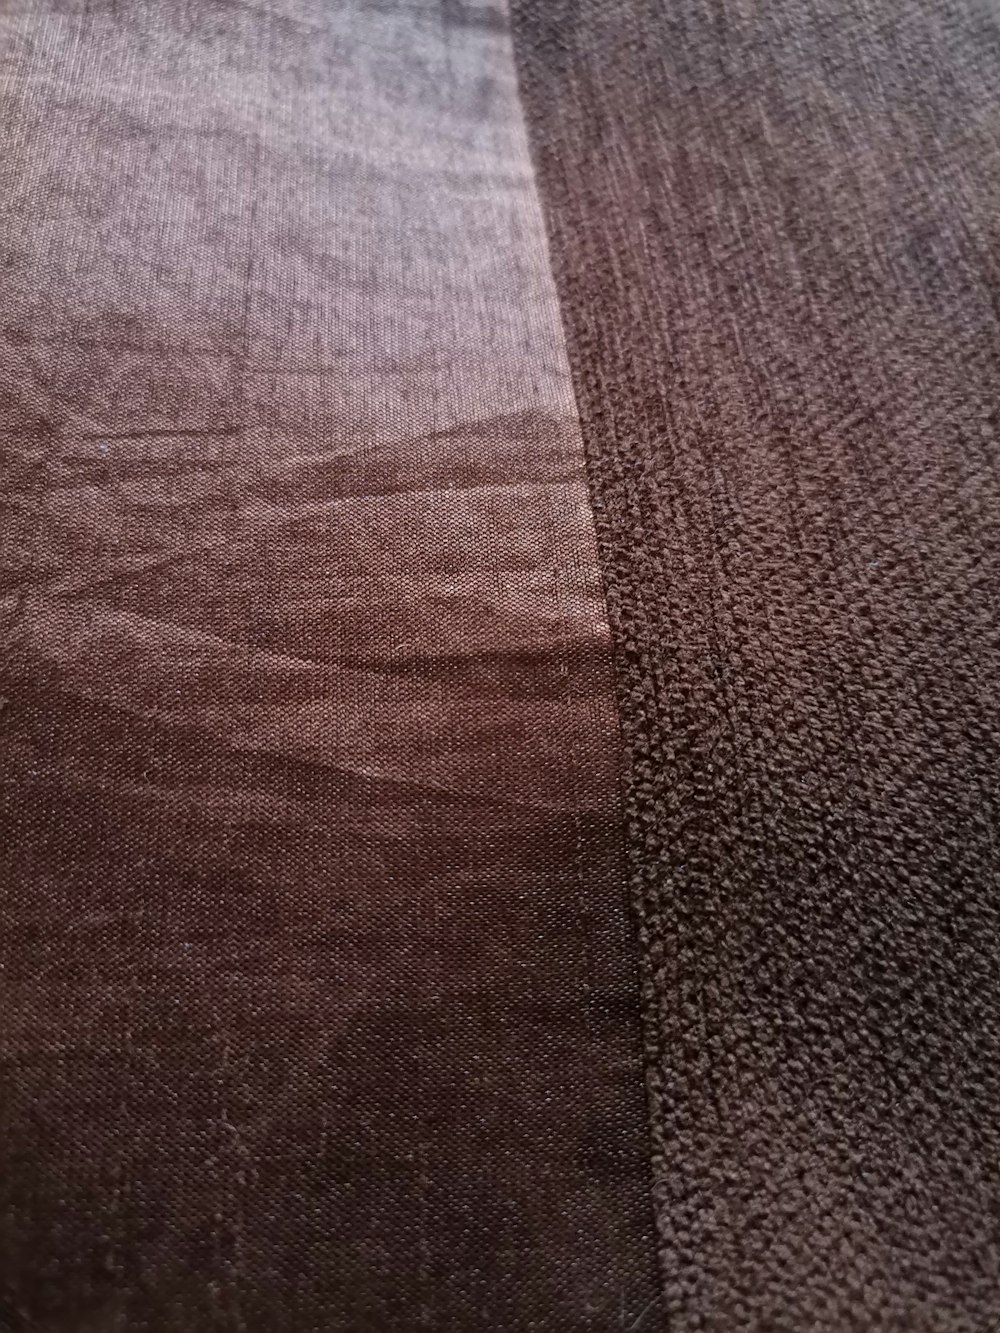 a close up of a bed with a brown bedspread